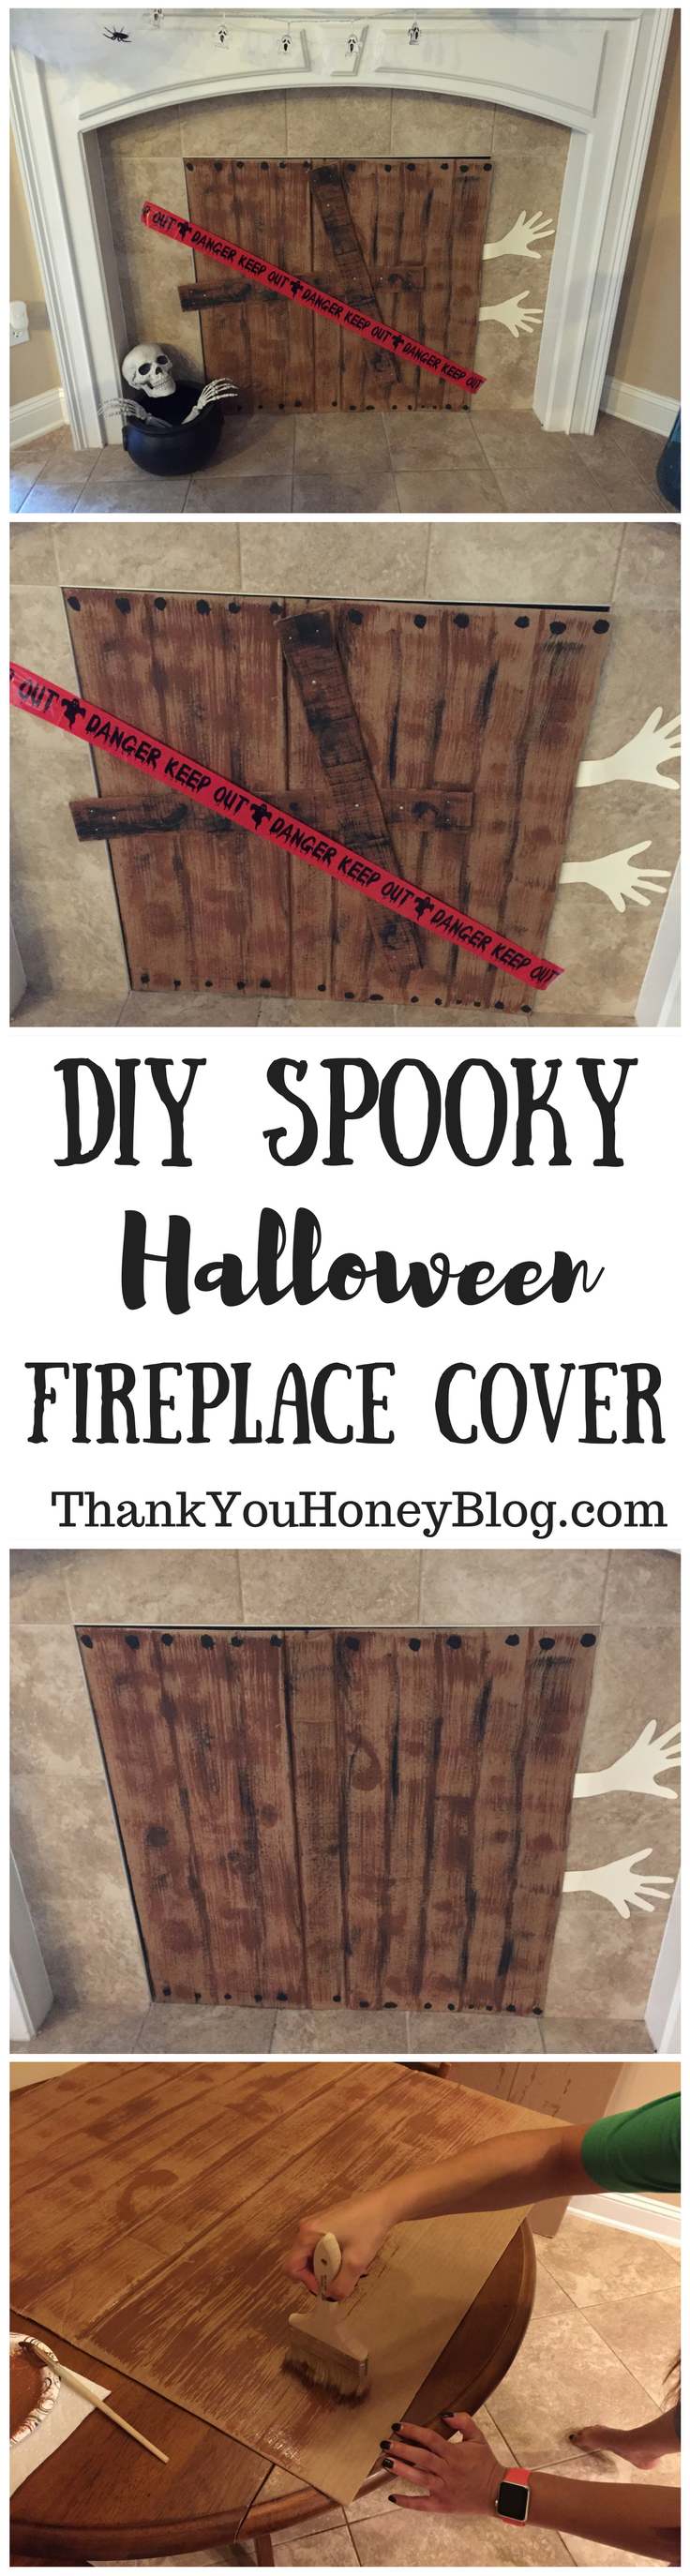 DIY Spooky Halloween Fireplace Cover